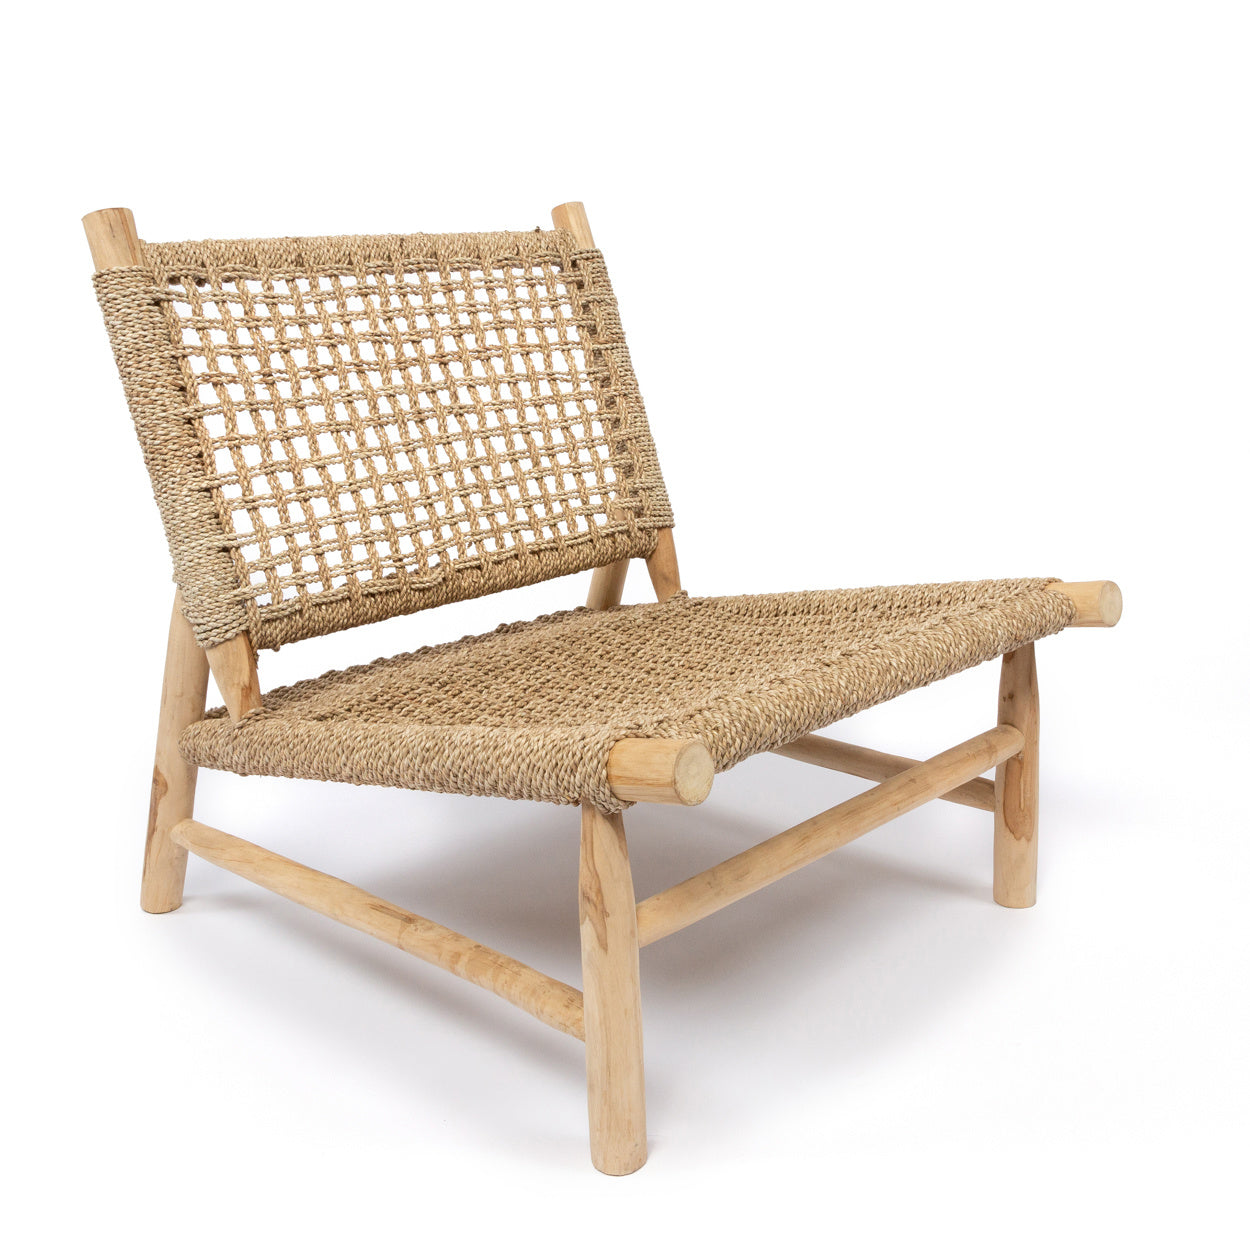 THE ISLAND SISAL One Seater Chair half-front view